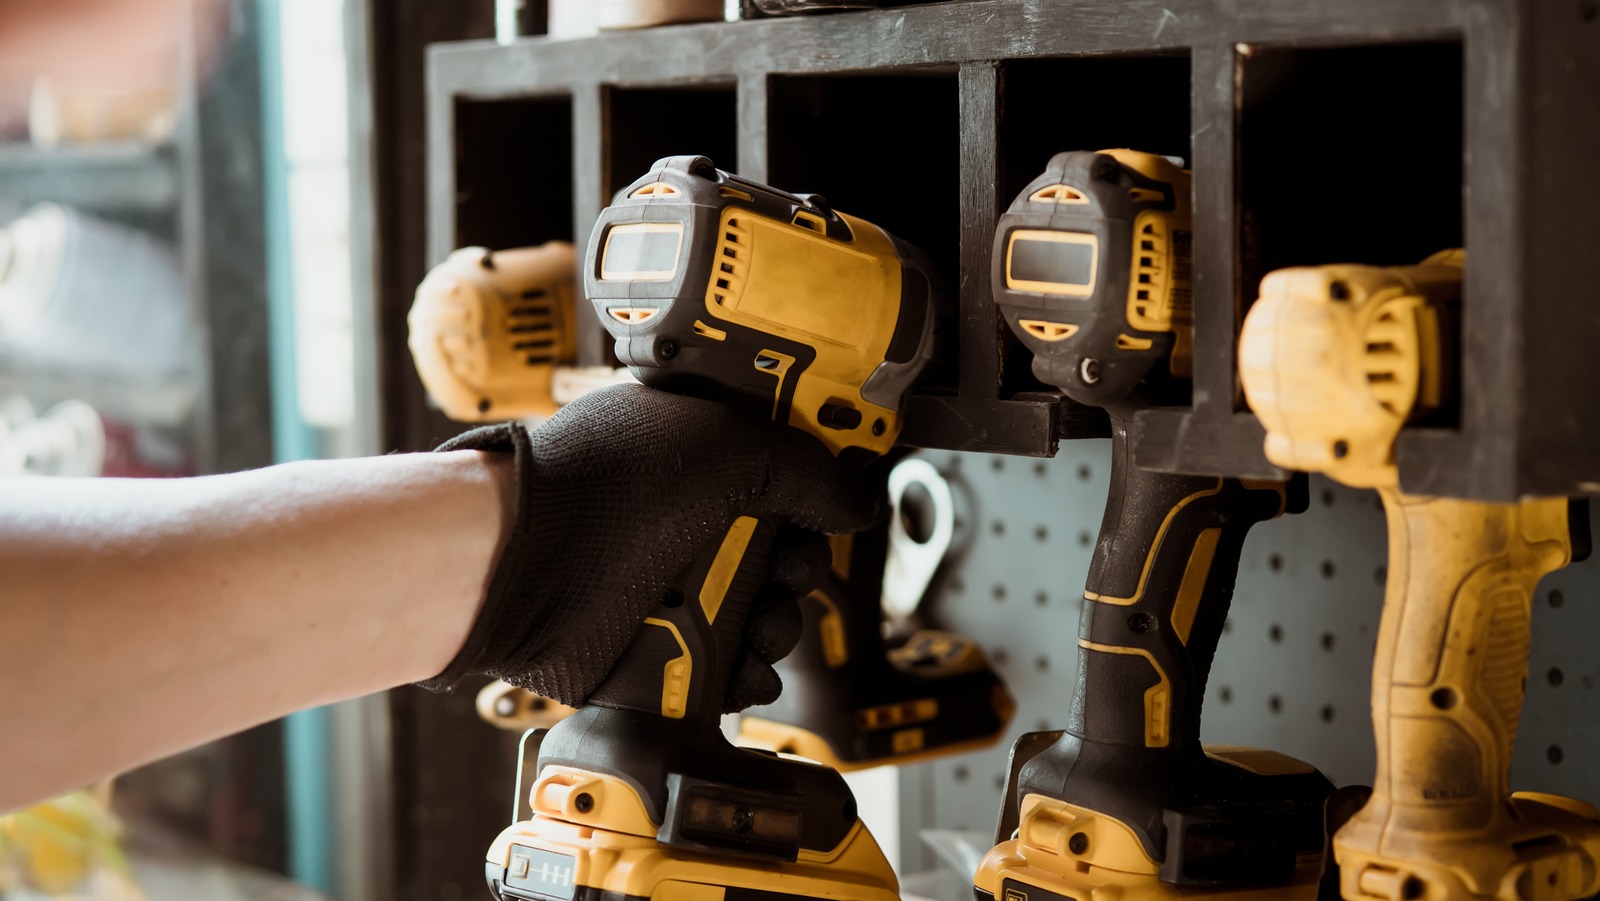 Every Major Impact Driver Brand Ranked Worst To Best